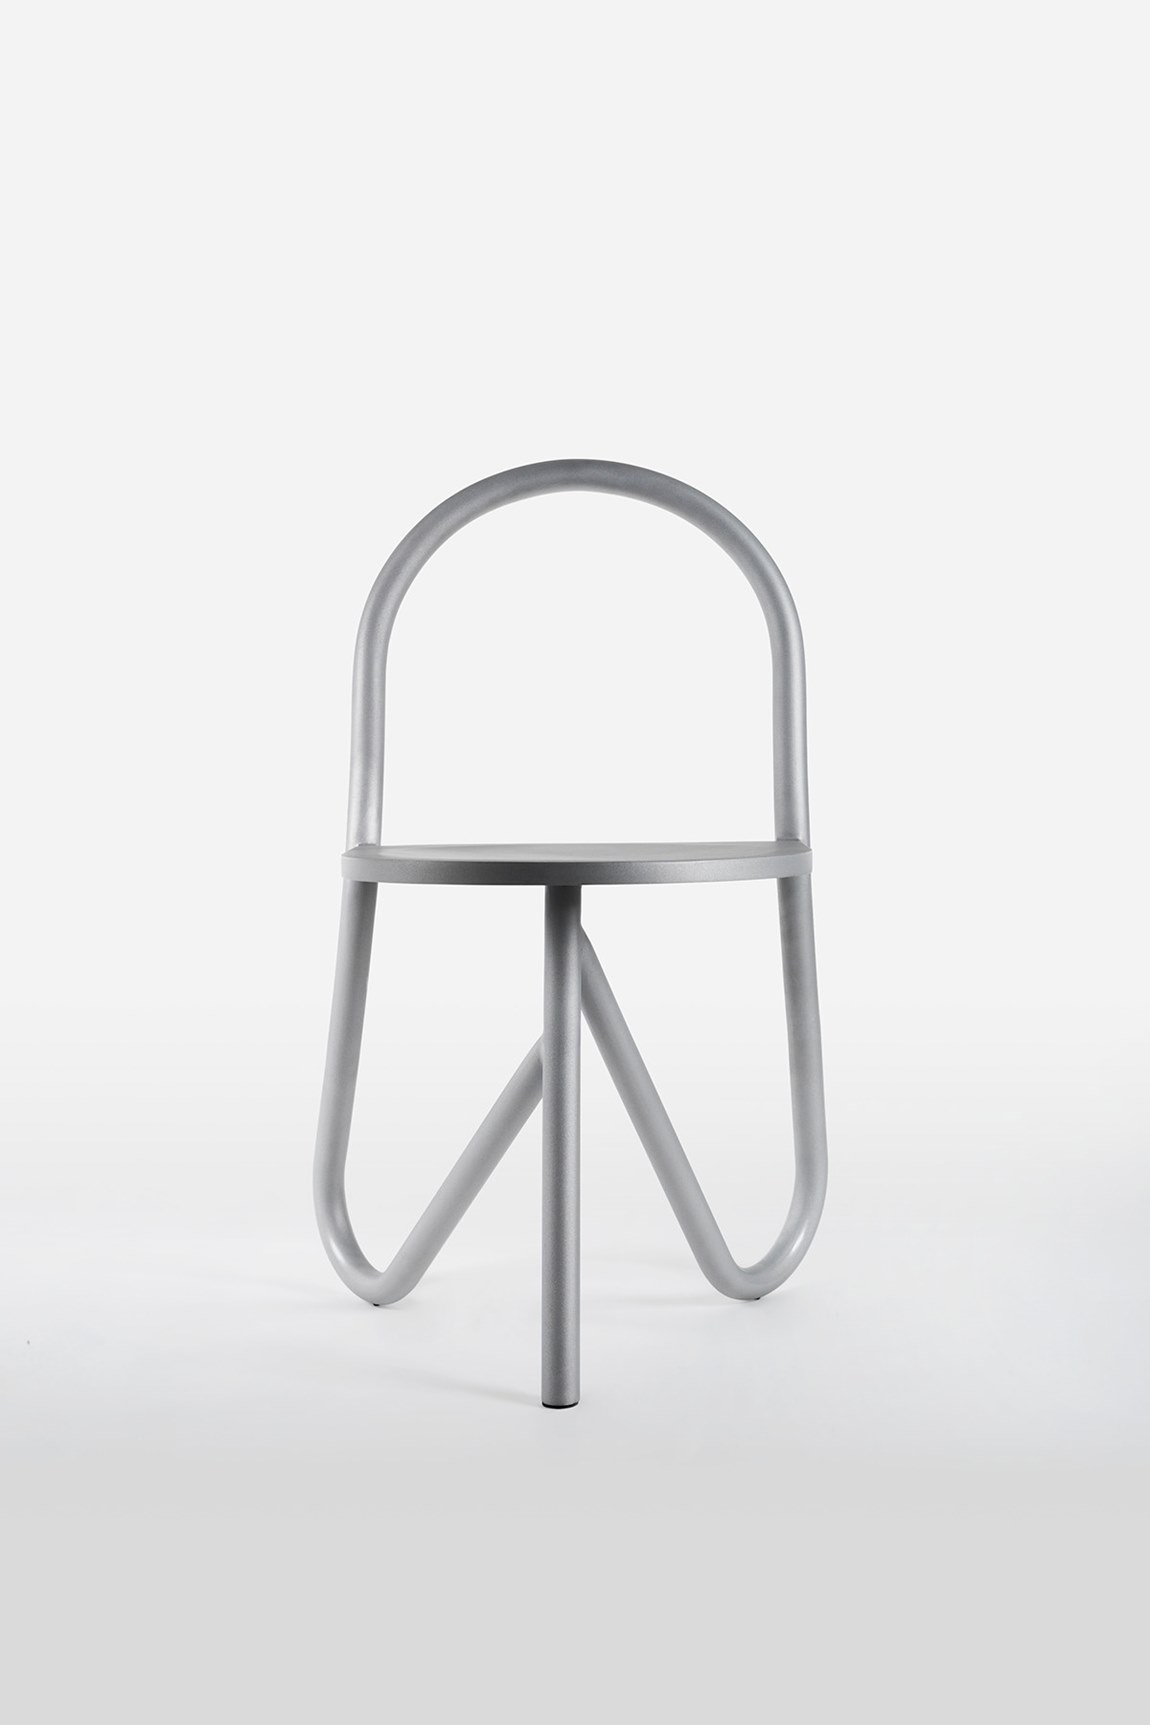 Chair No.19: A Modern and Elegant Furniture Design with a Single Form